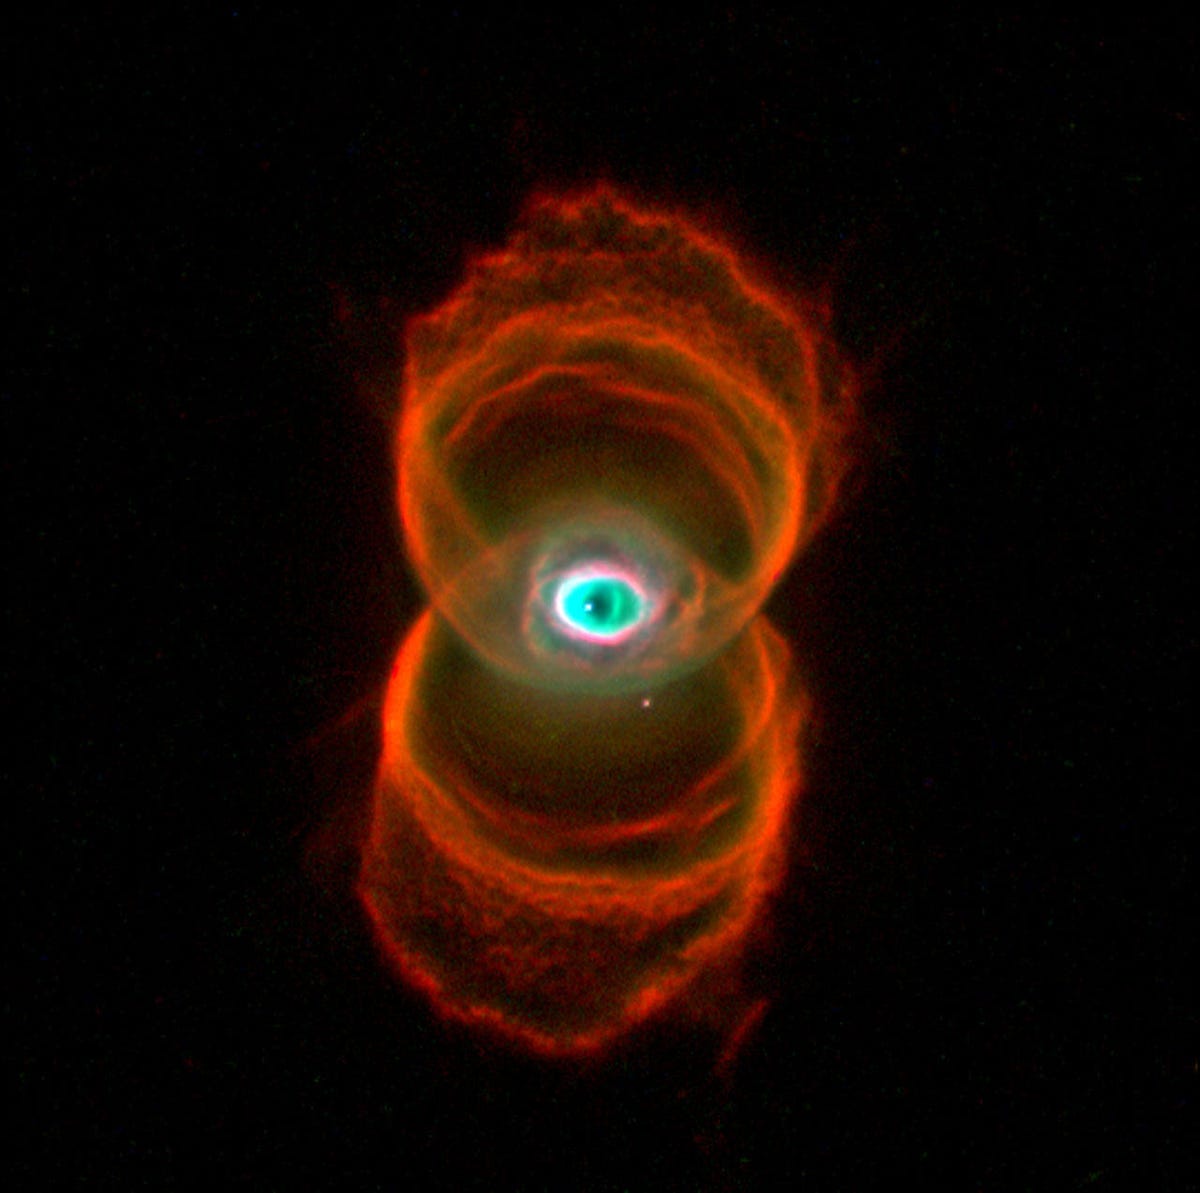 Overlapping reddish rings meet in the middle with an eye-like space formation in a nebula.